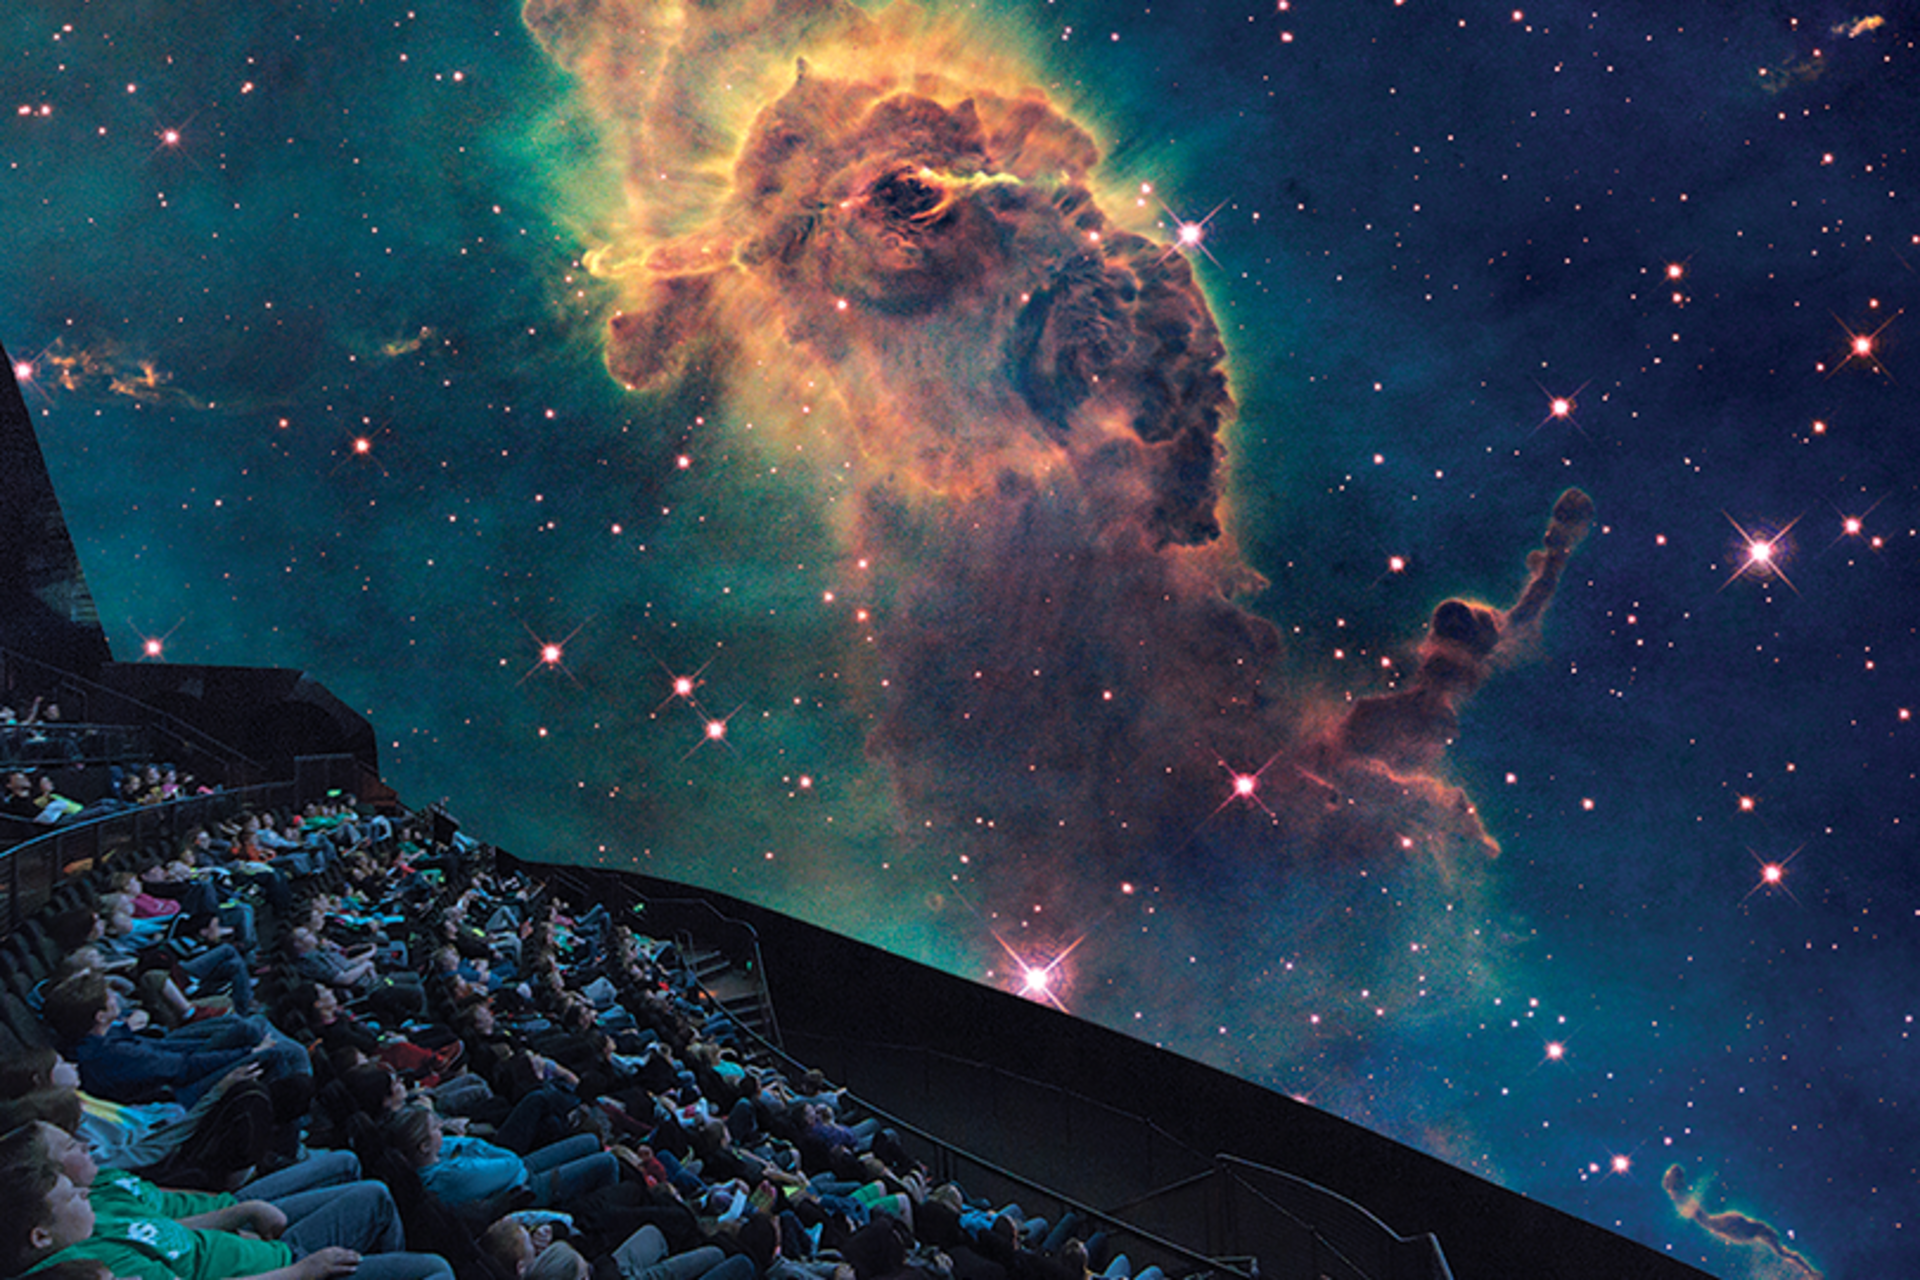 A photo of the Omnitheater with the audience viewing a projection of space.